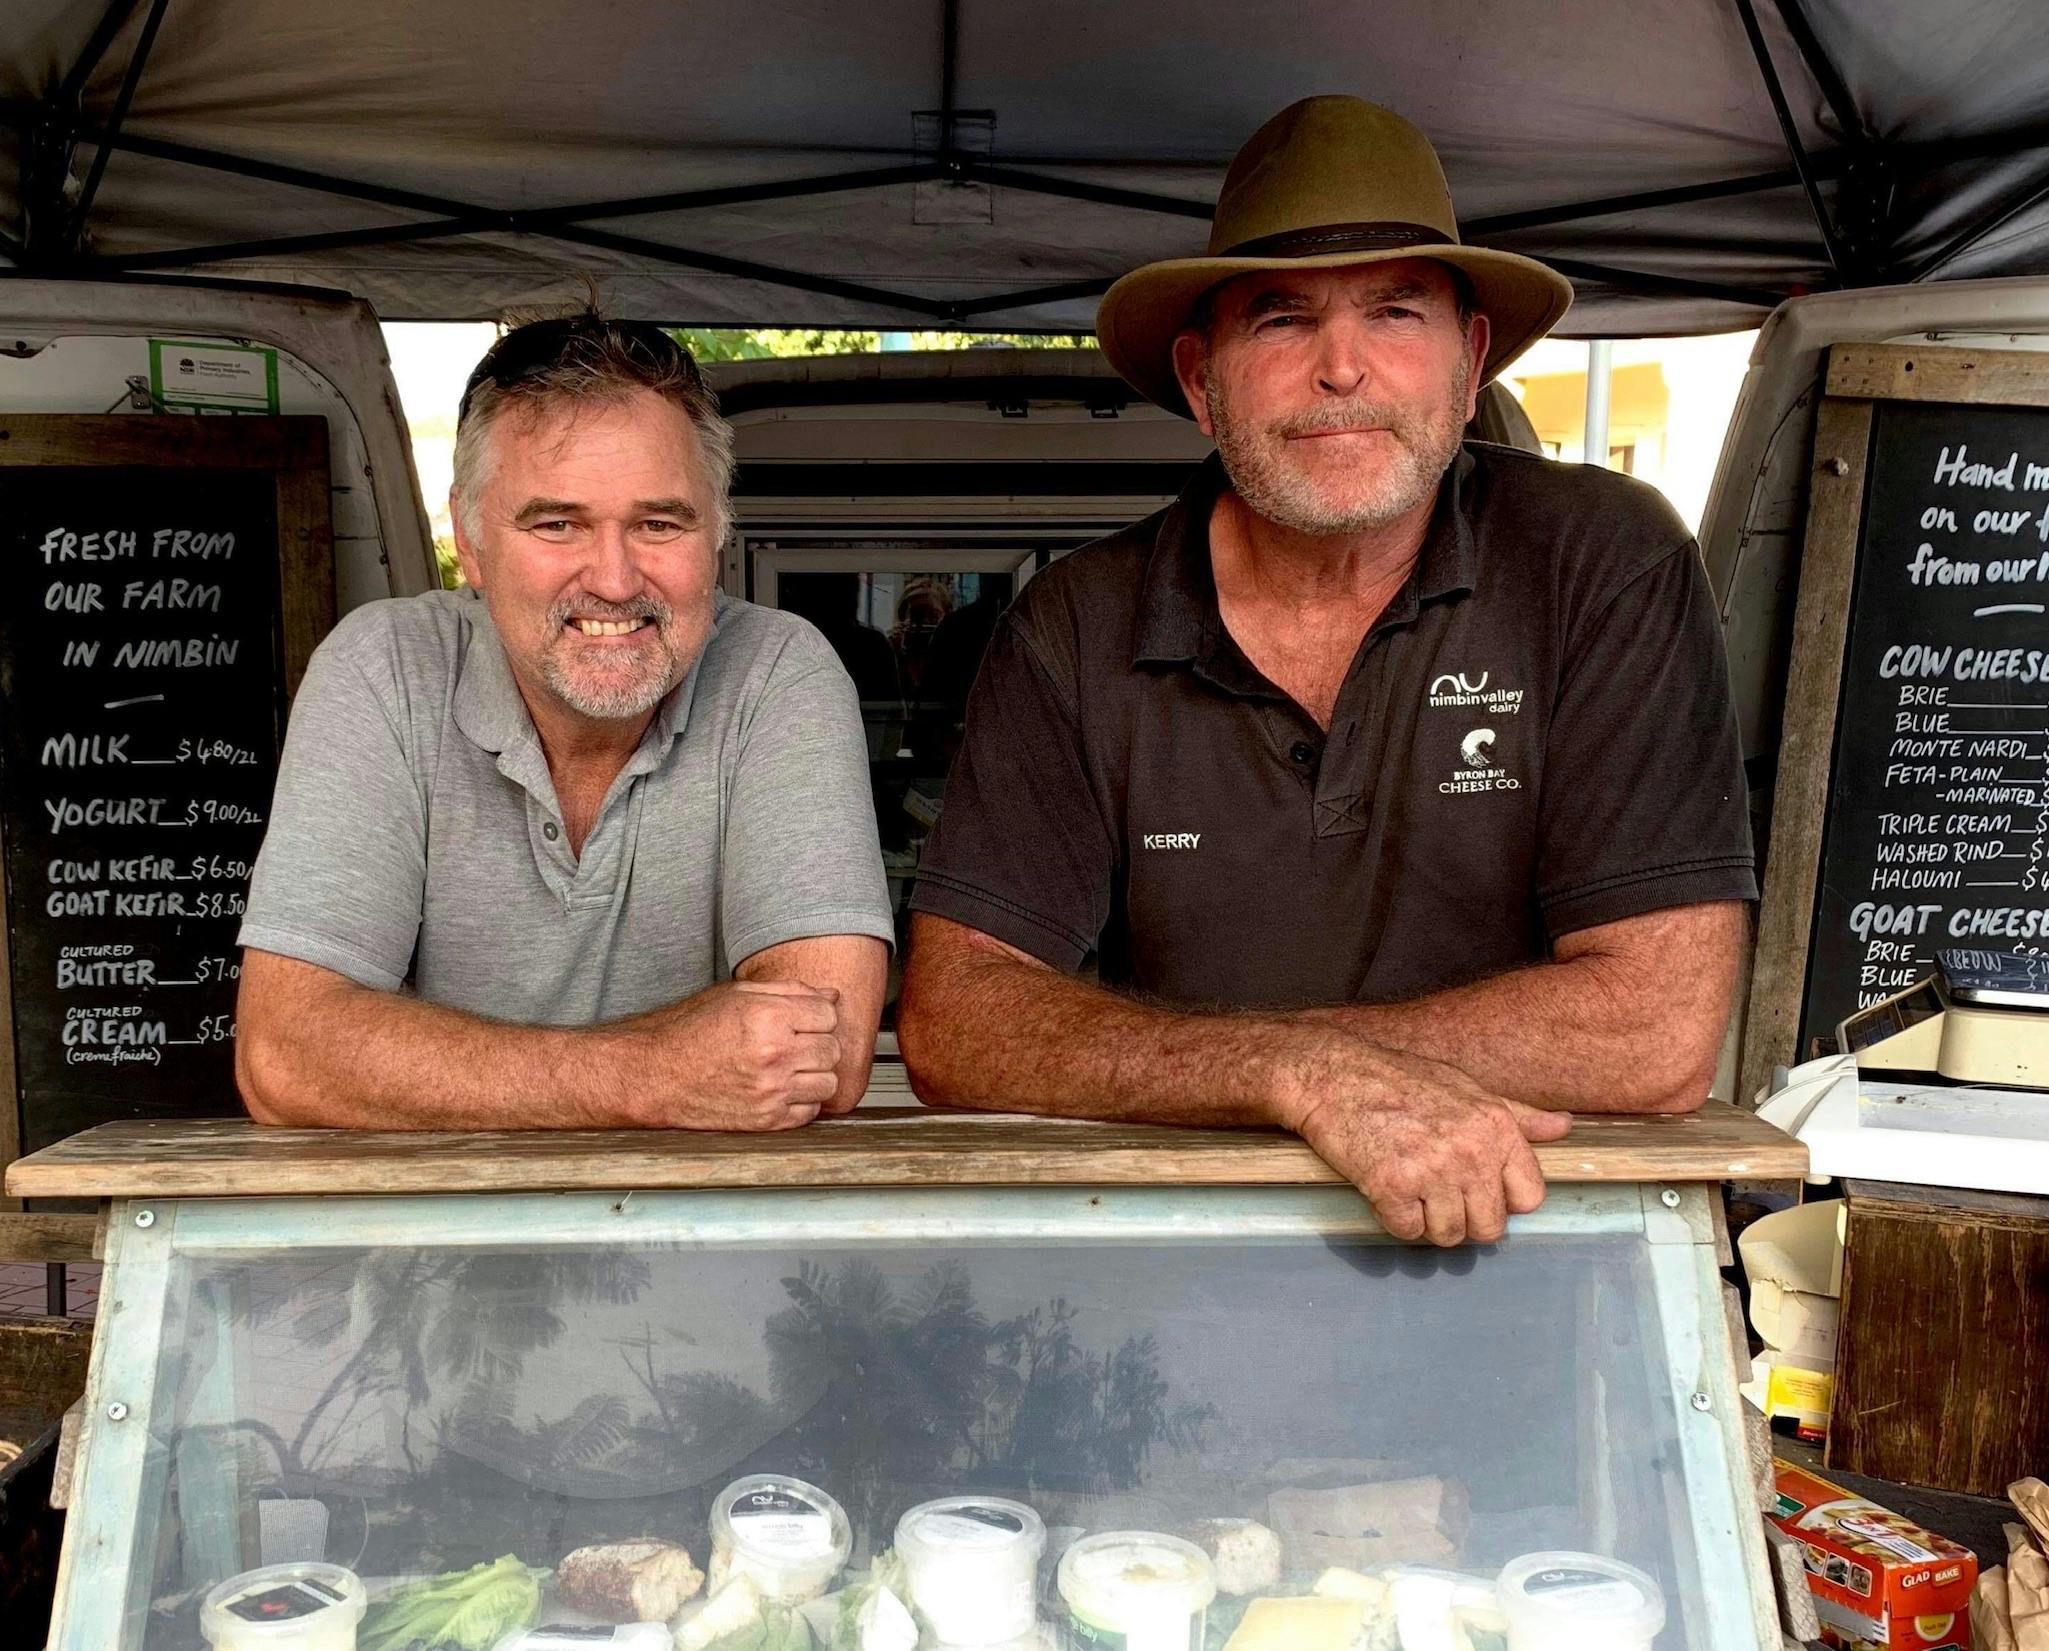 Our Farmers: Meet Kerry & Paul from Nimbin Valley Dairy